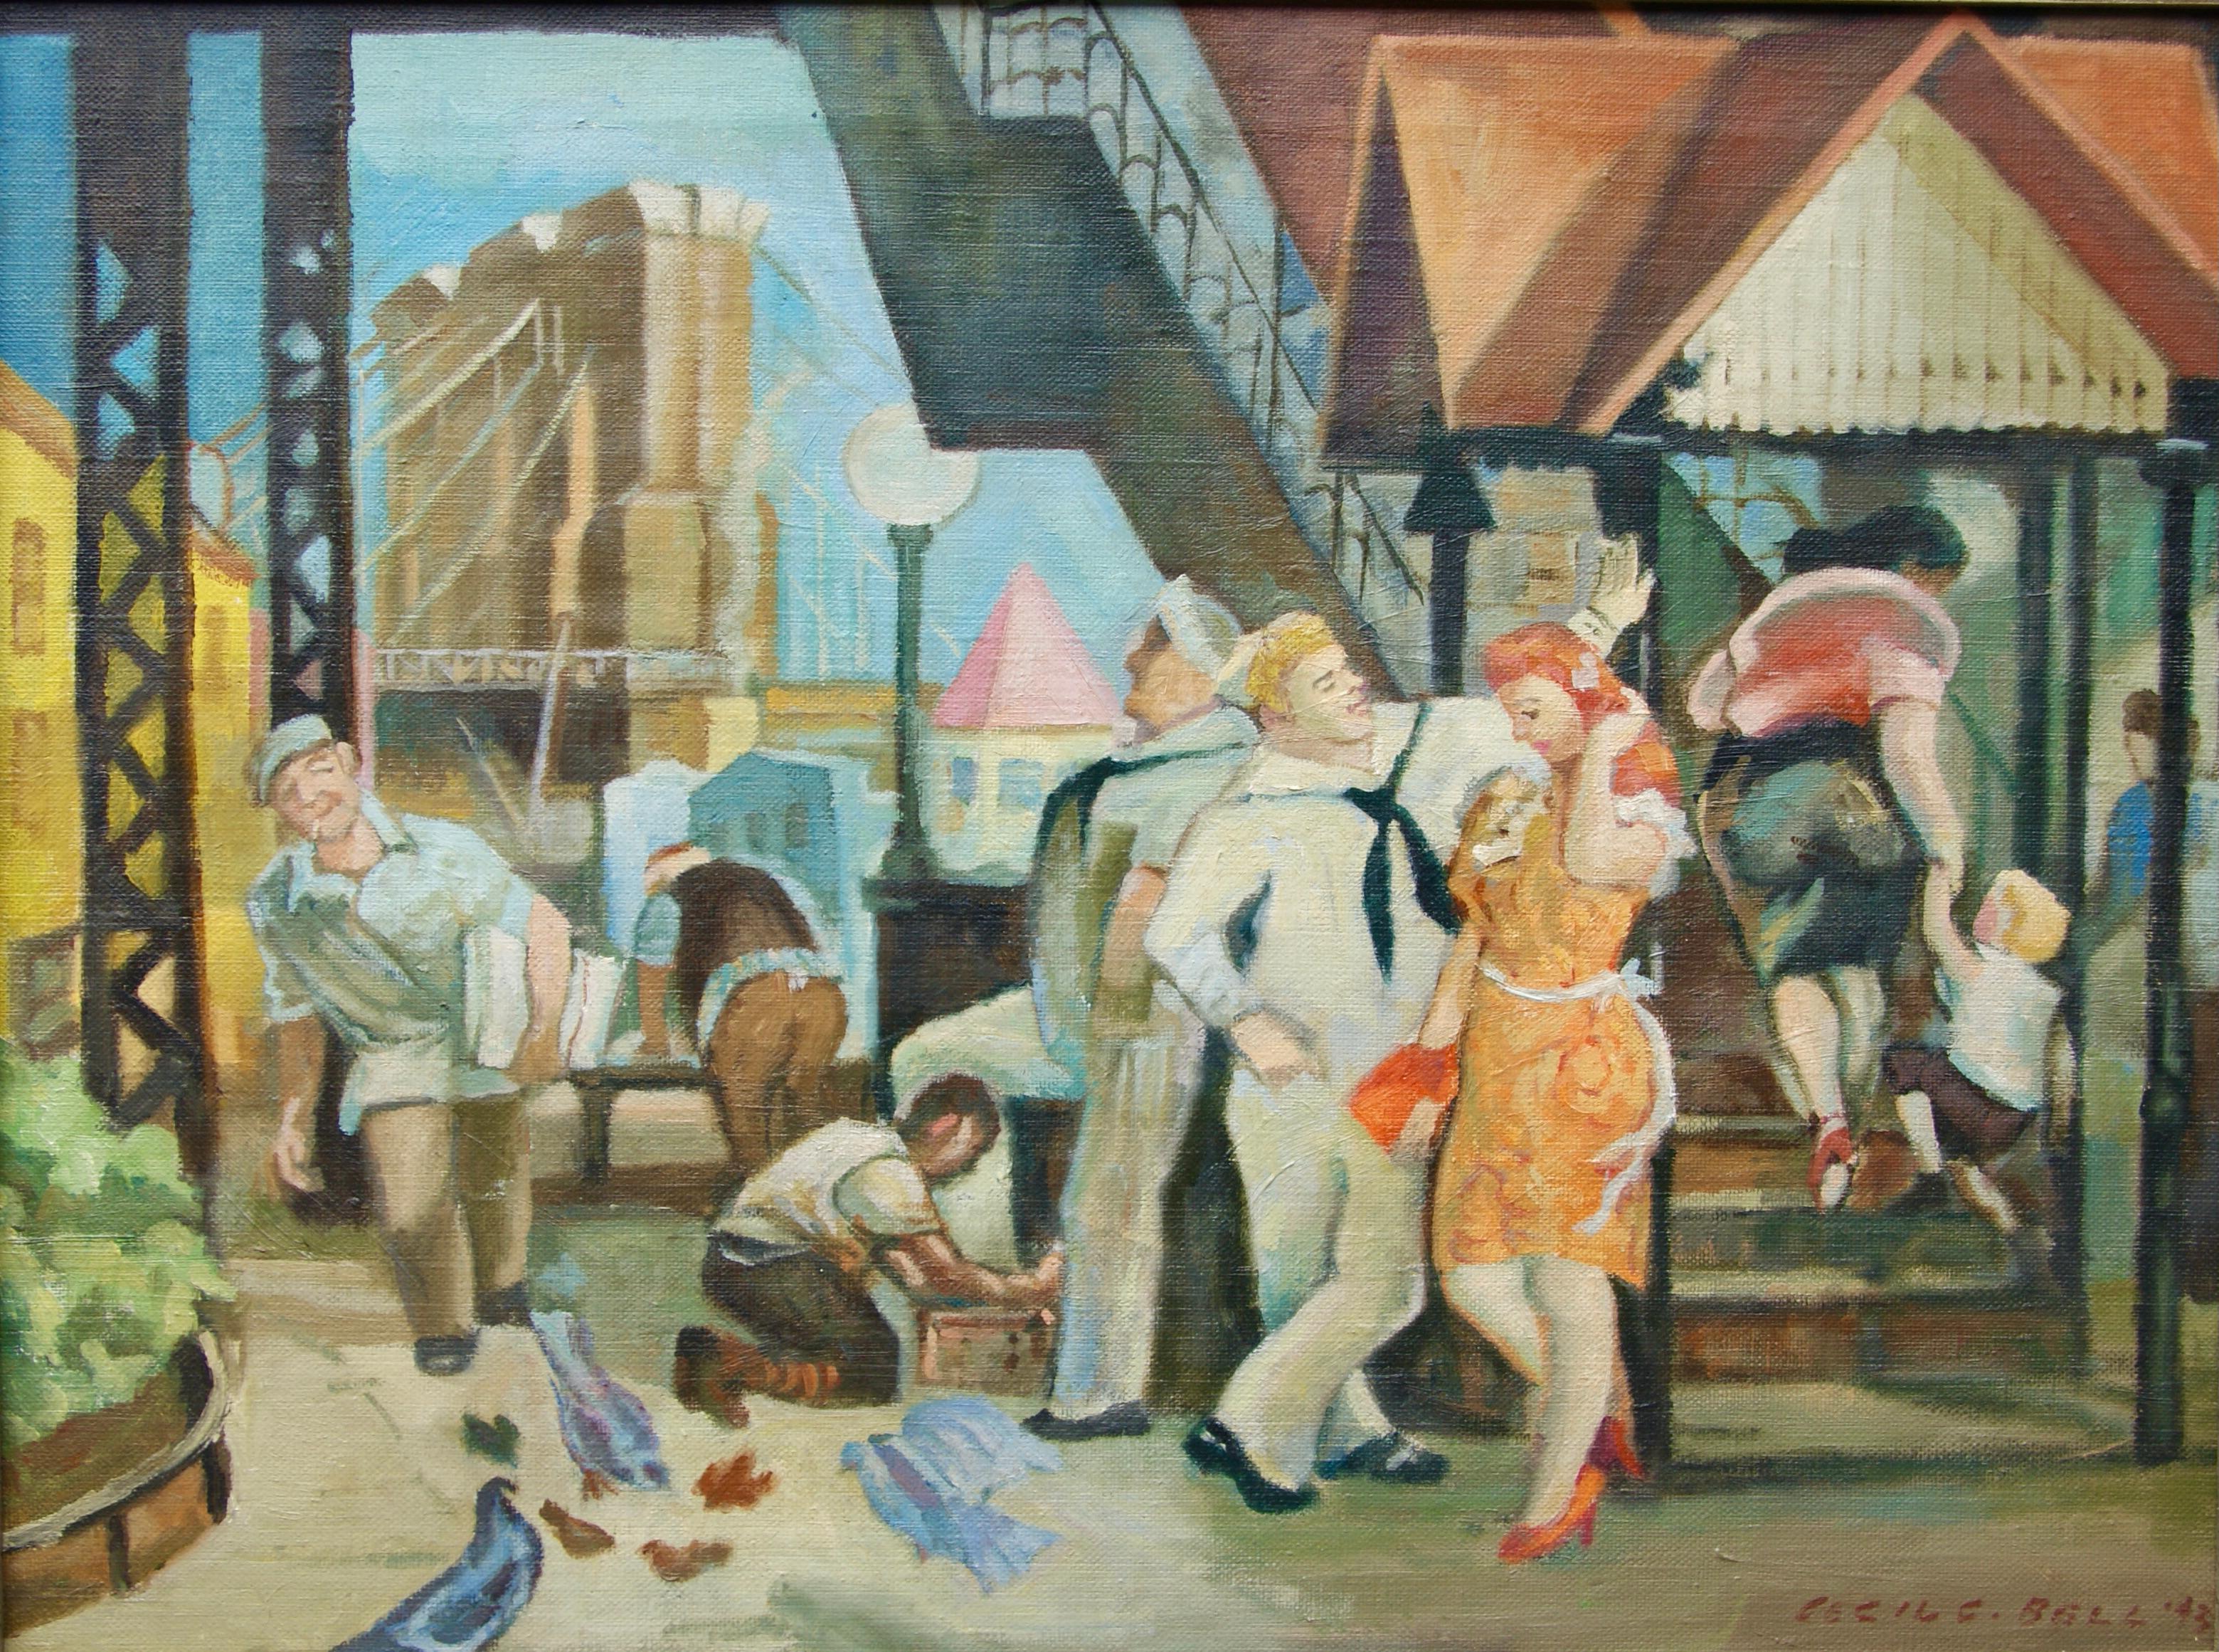 Cecil "Crosley" Bell Figurative Painting - "Under the El" American Scene Modernism NYC WPA 20th Century Realism 1940s